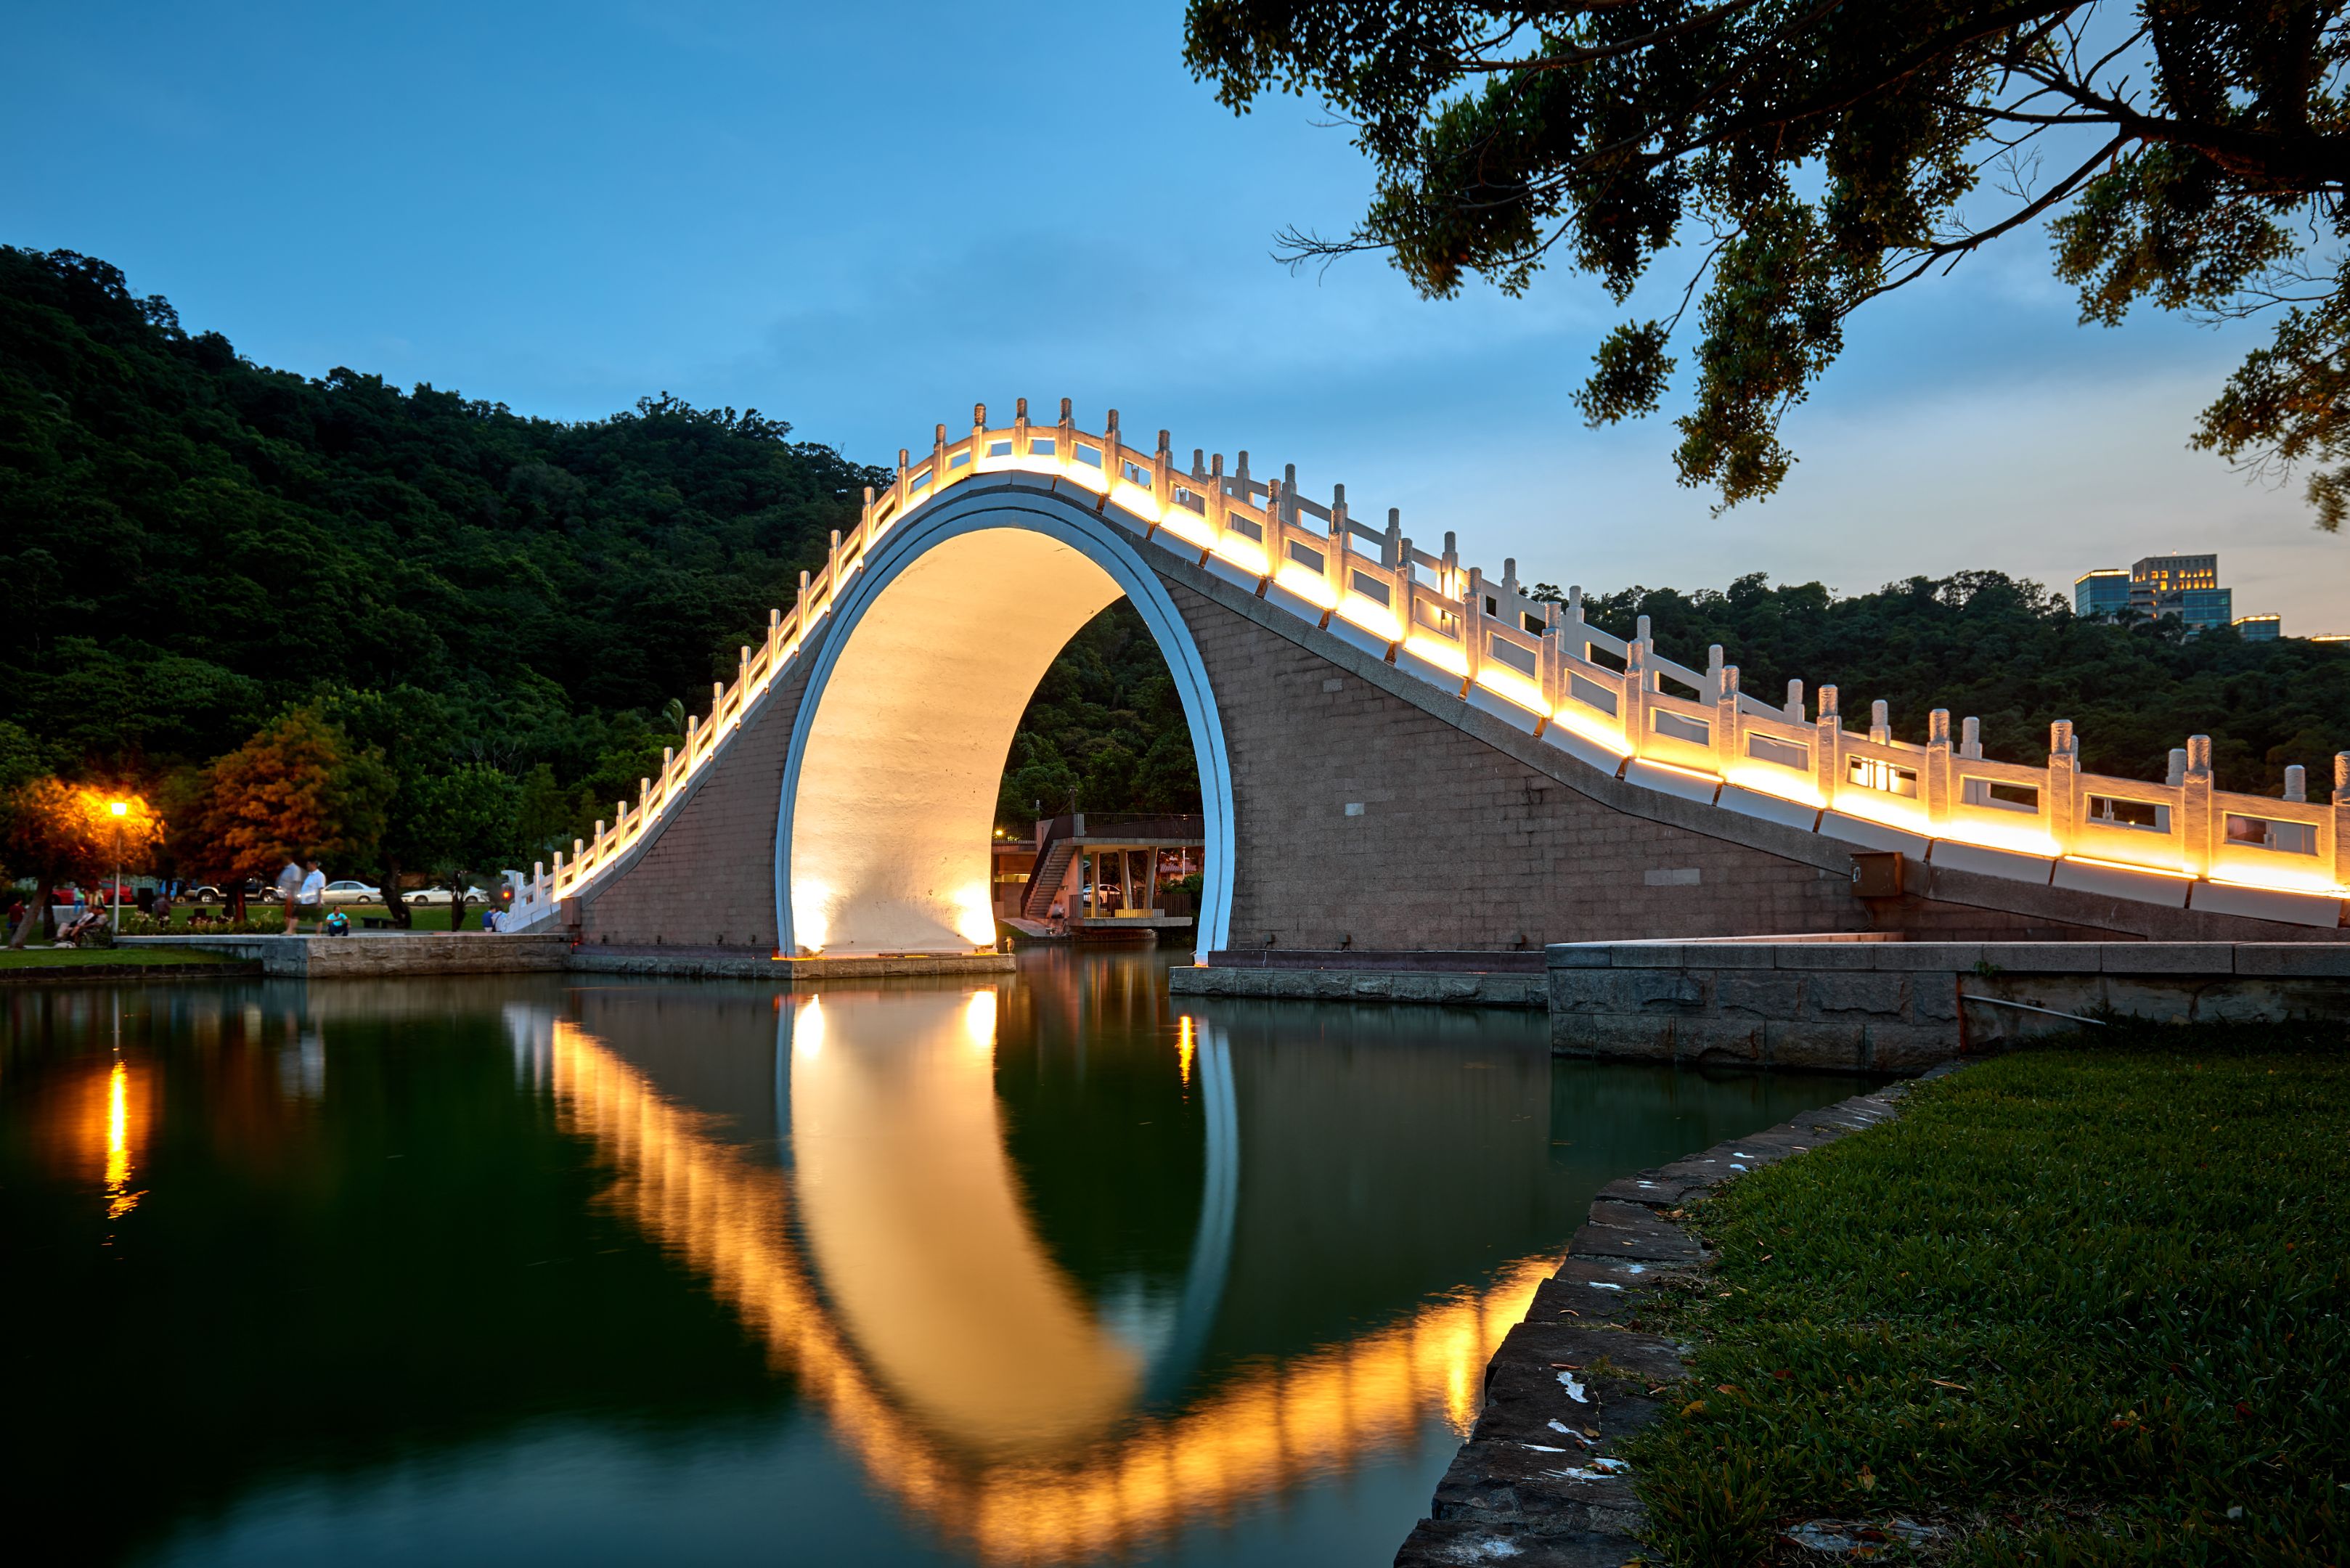 Reflection of the Dahu bridge in the water after the sunset in Taipei Park, Taiwan